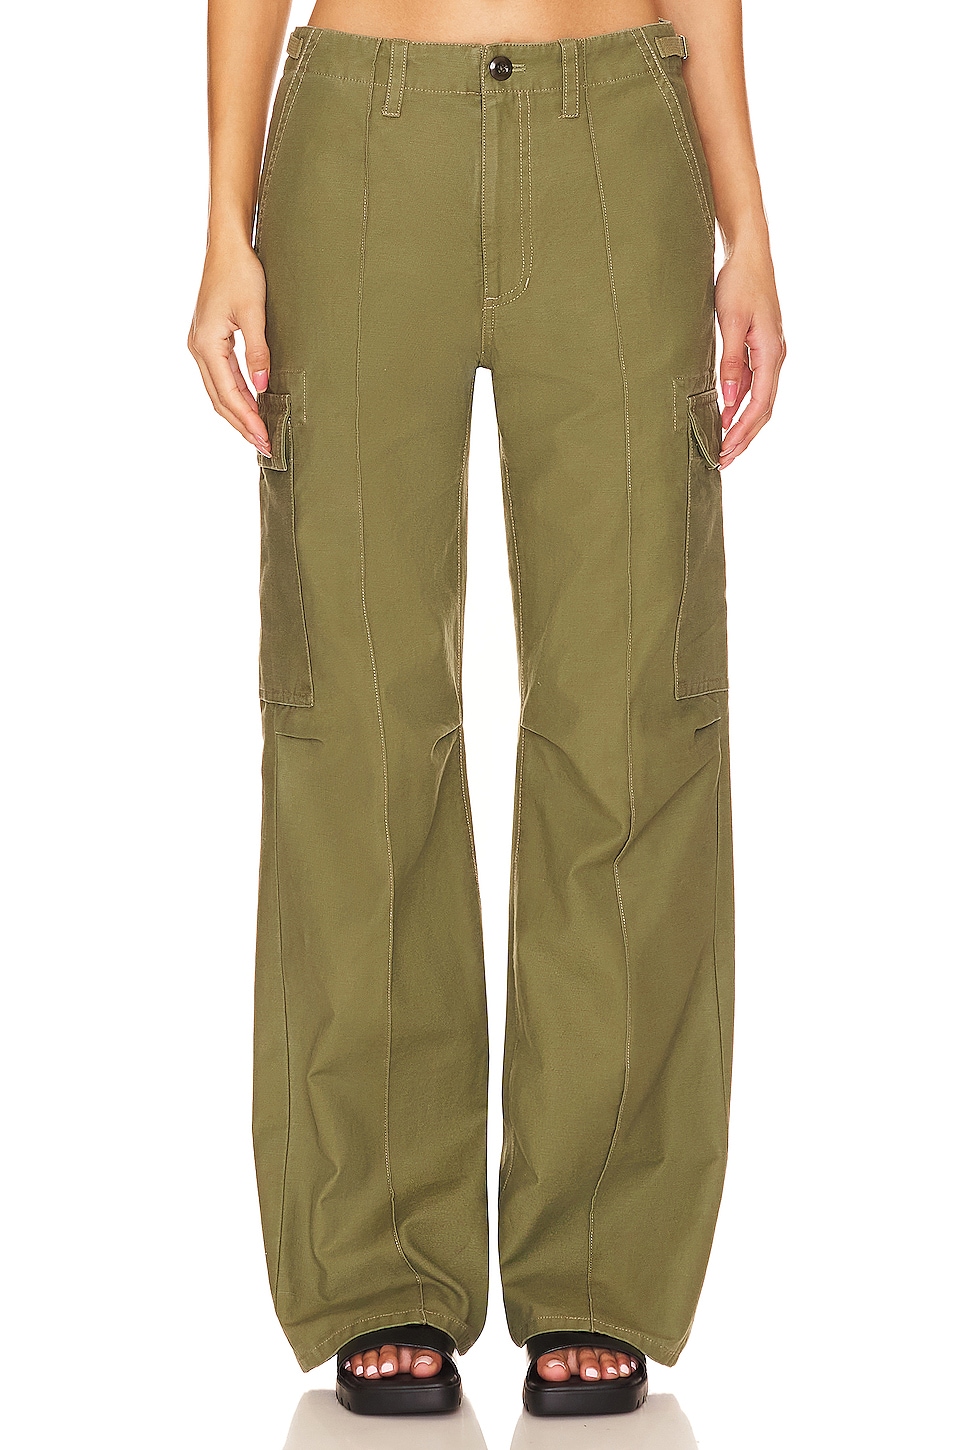 RE/DONE Military Trouser in Bayleaf